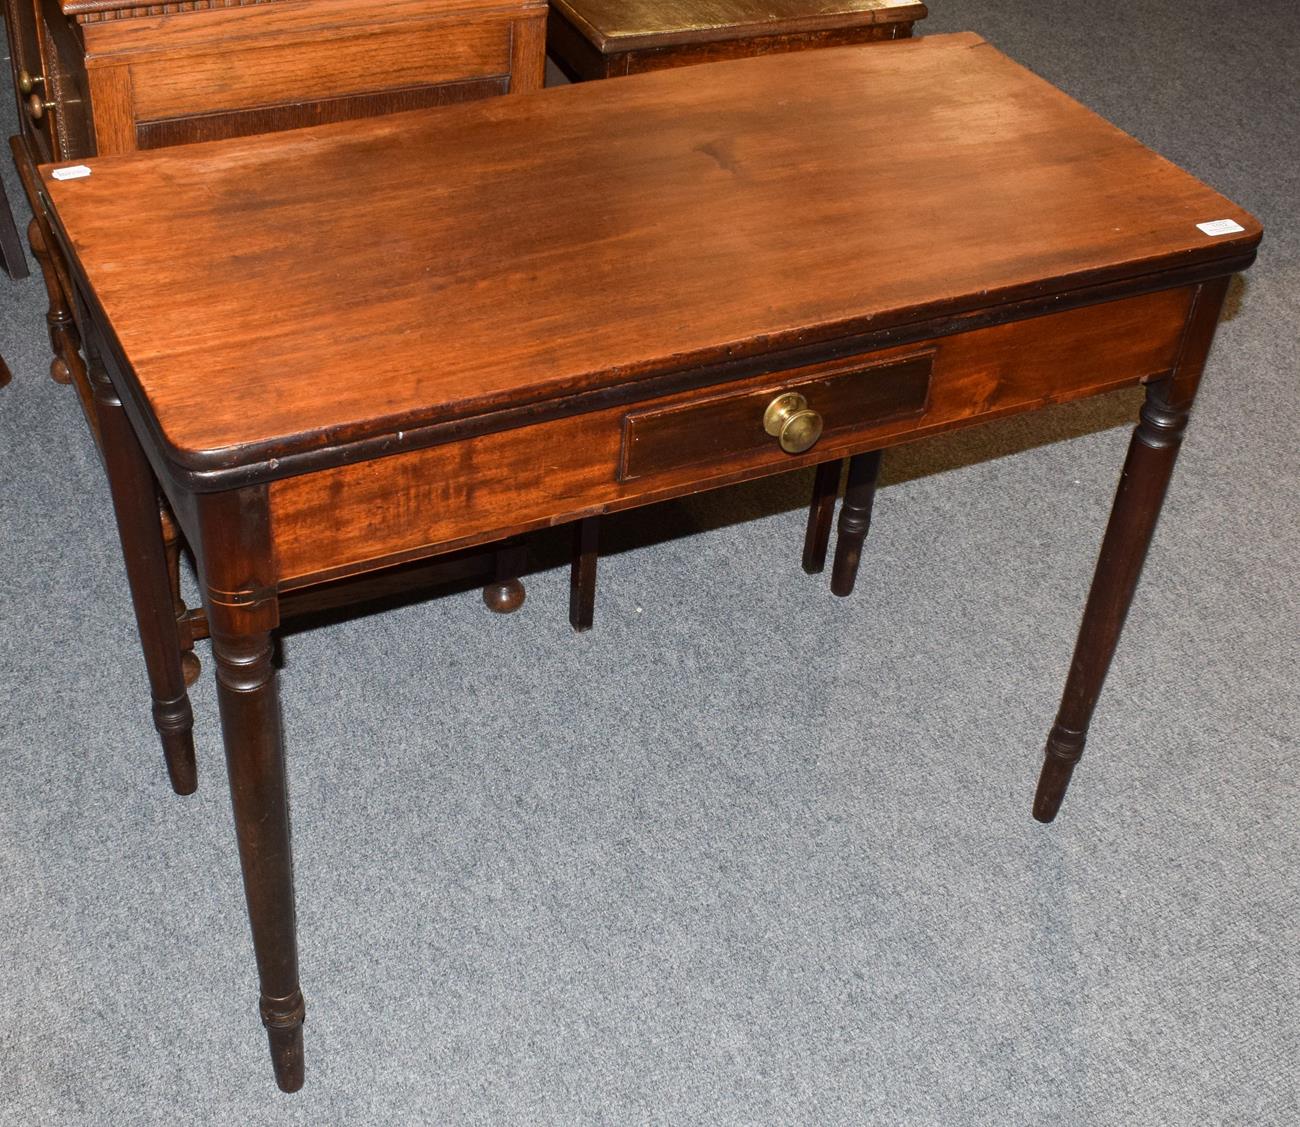 A Victorian mahogany fold over tea table, with a single drawer, 96cm wide by 46.5cm by 75cm high